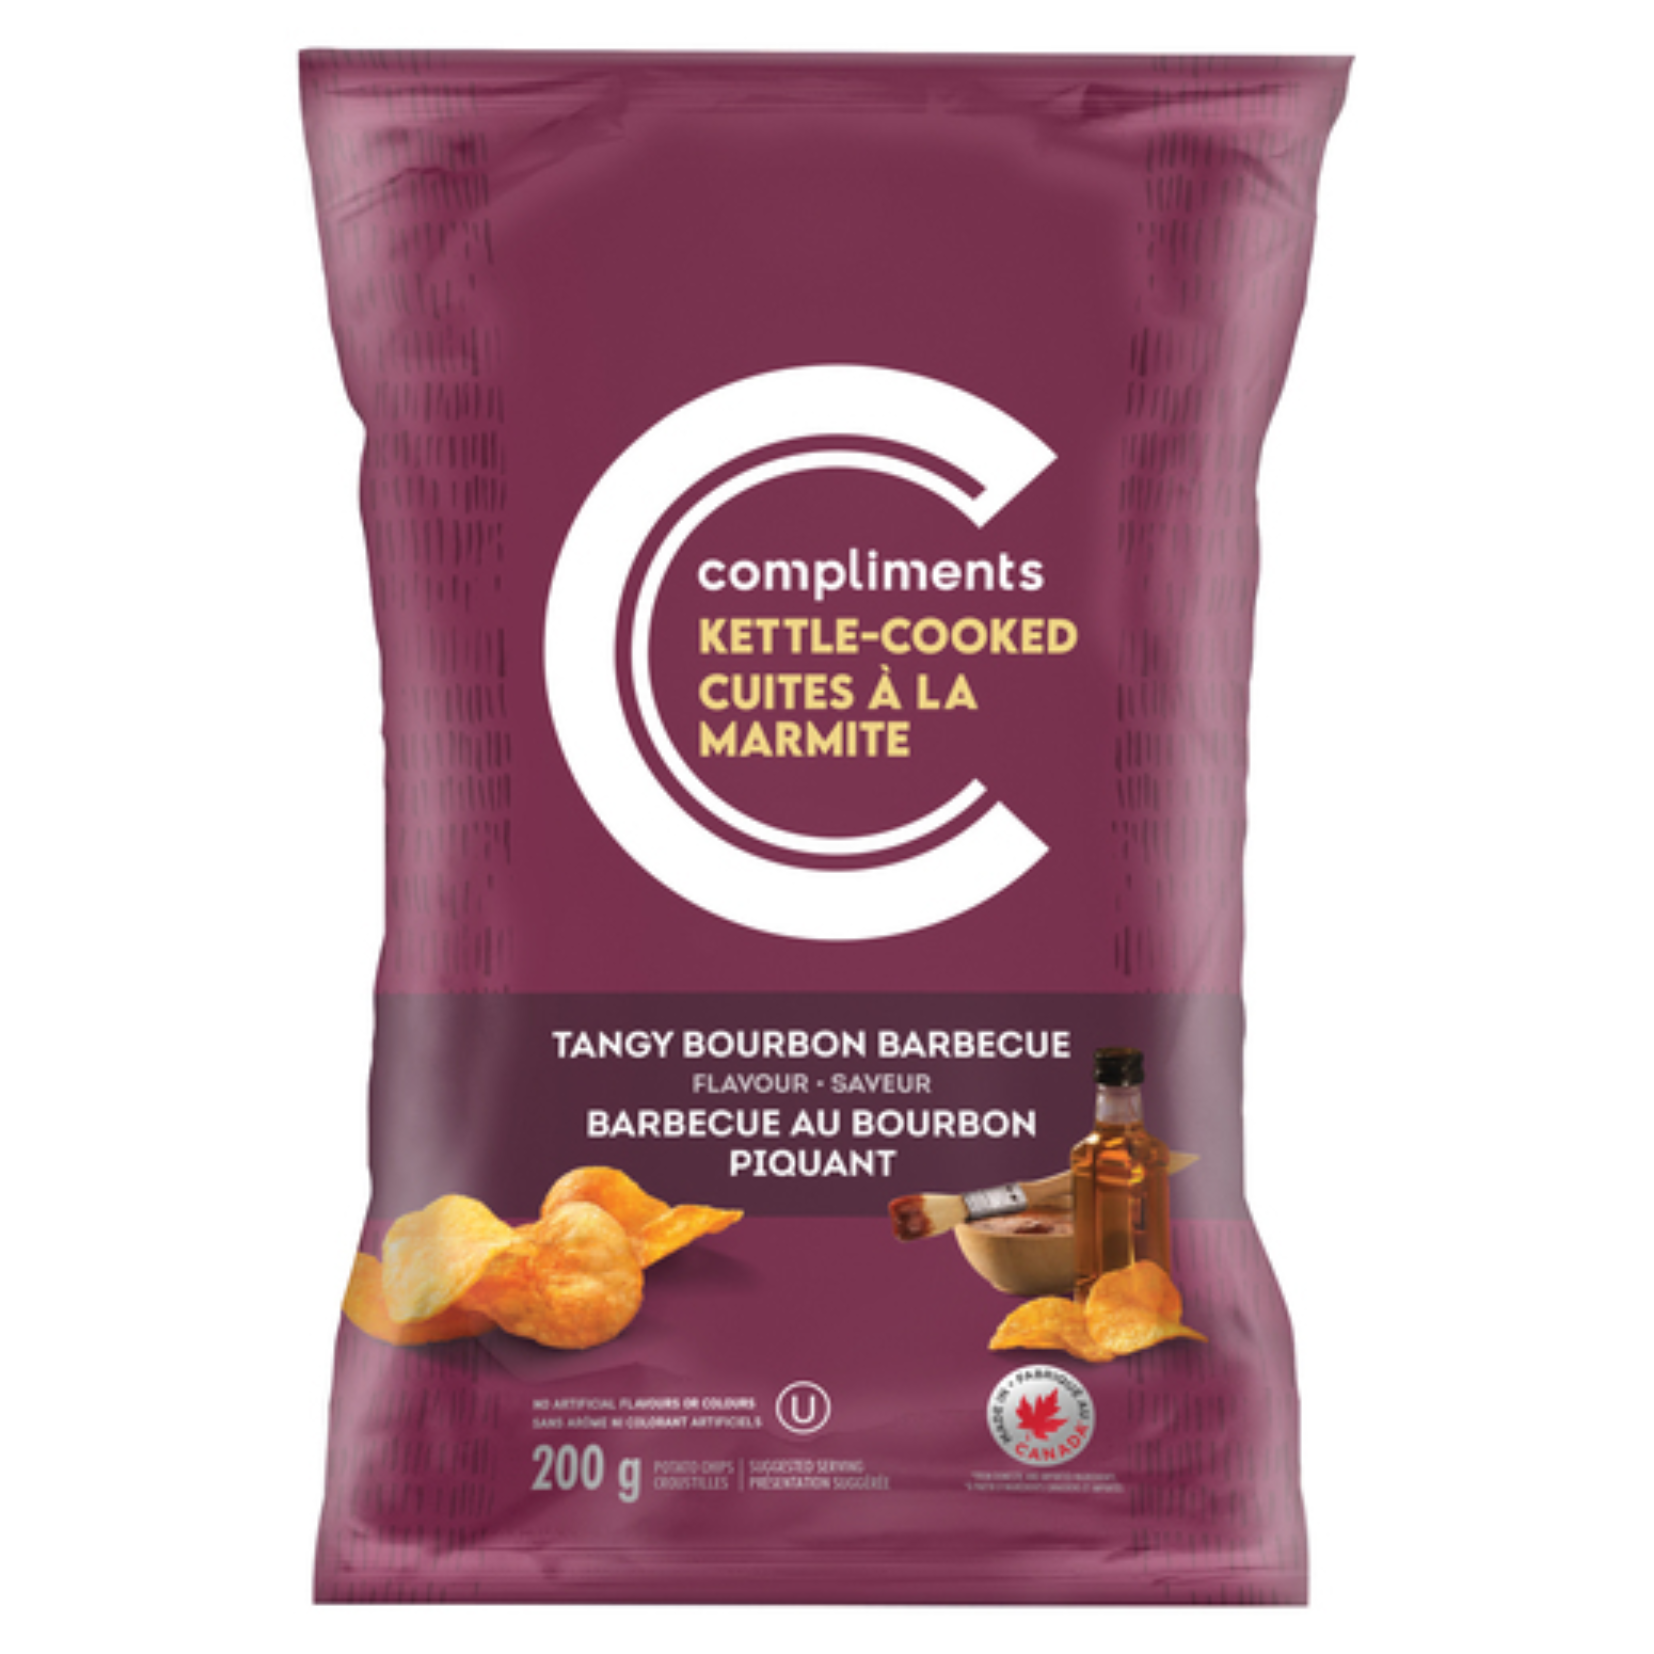 Compliments Sweet & Tangy Bourbon BBQ Kettle Cooked Potato Chips 200g